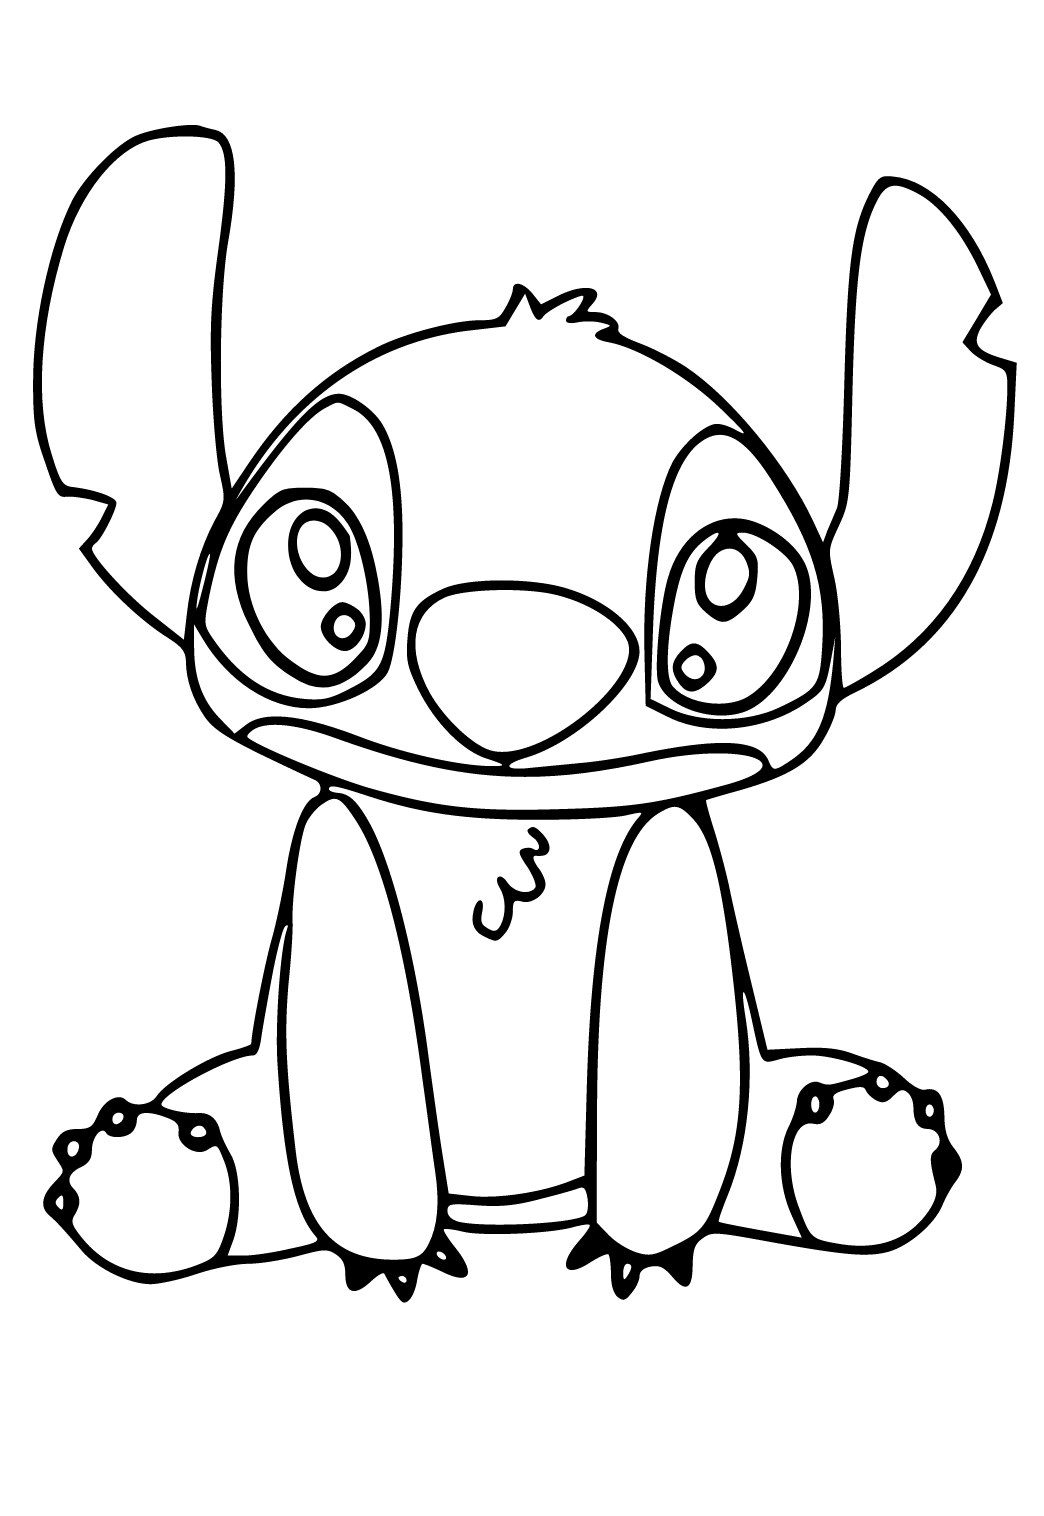 Free printable stitch cute coloring page sheet and picture for adults and kids girls and boys